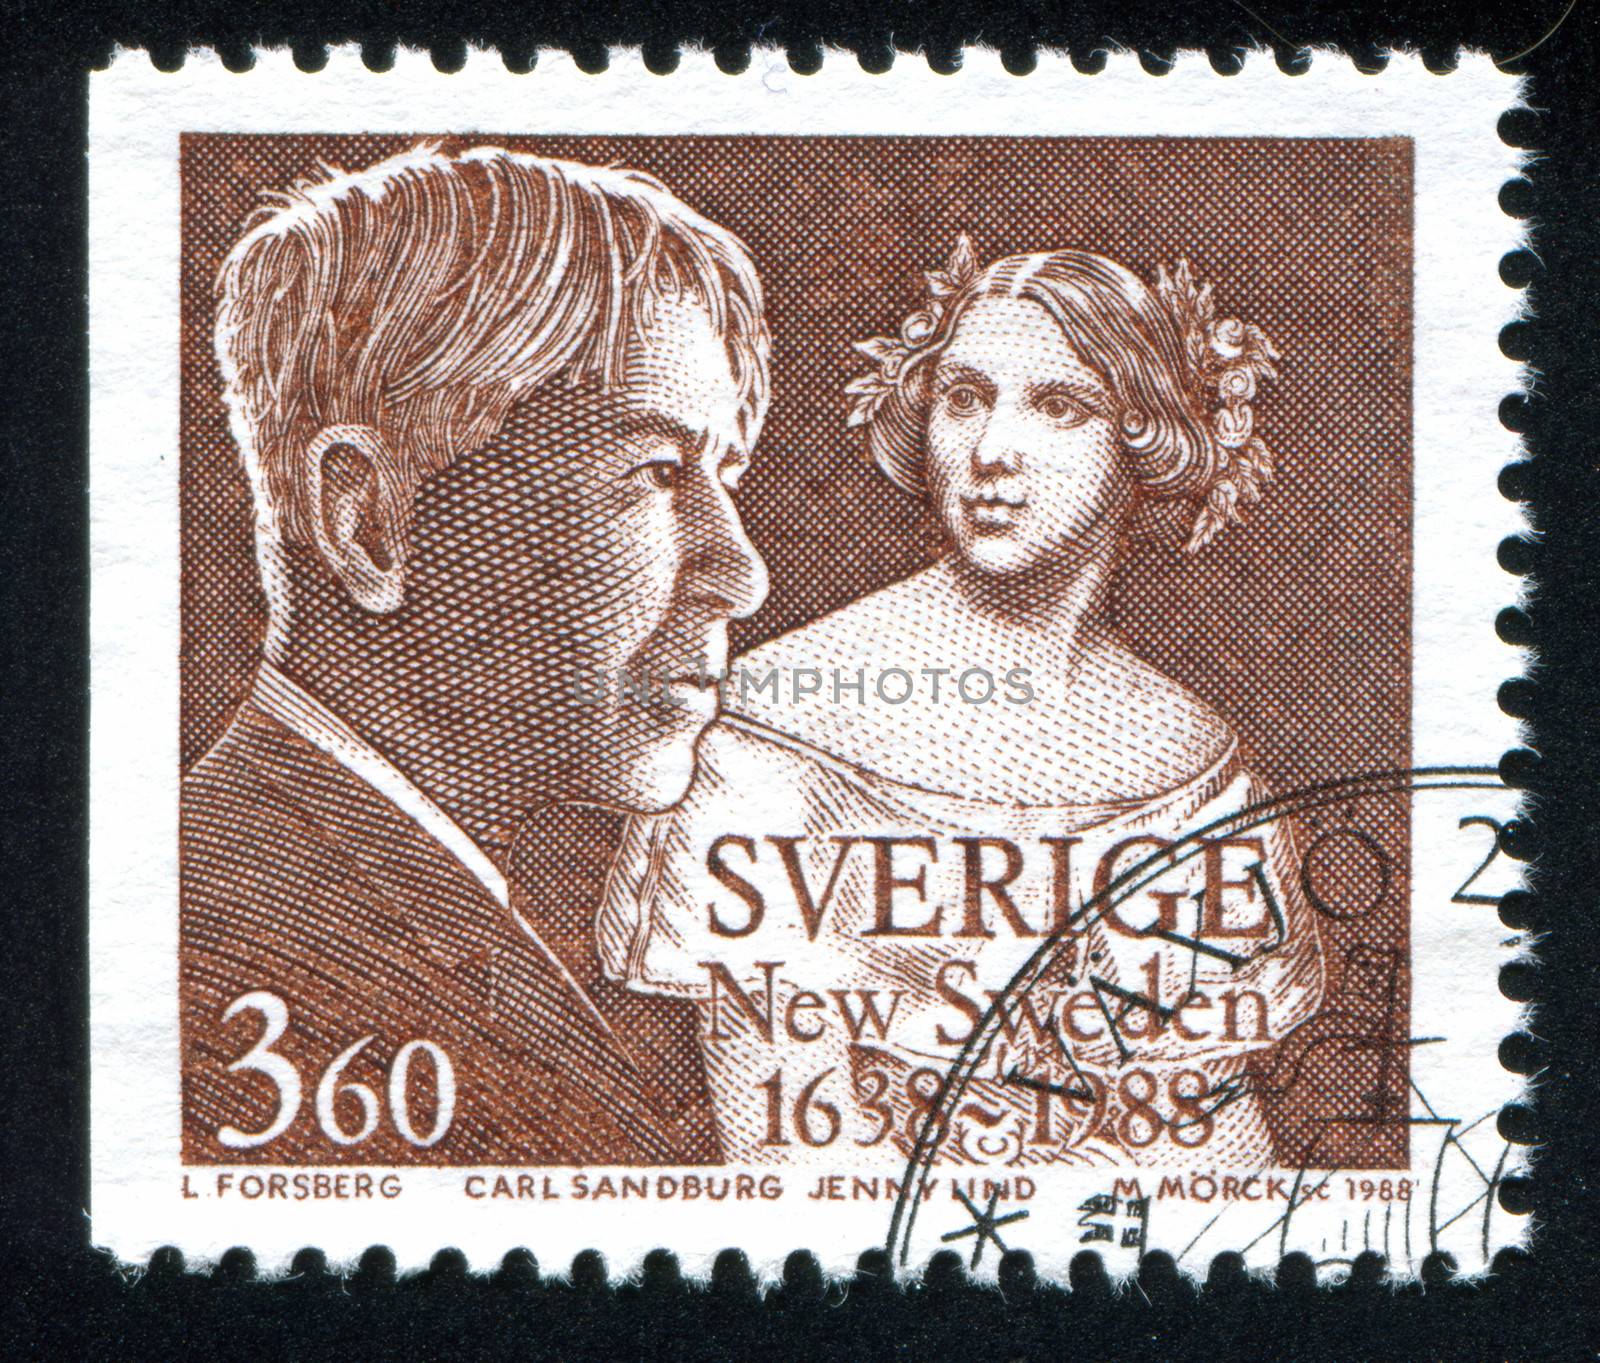 SWEDEN - CIRCA 1988: stamp printed by Sweden, shows Carl Sandburg, author, and Jenny Lind, opera singer, circa 1988